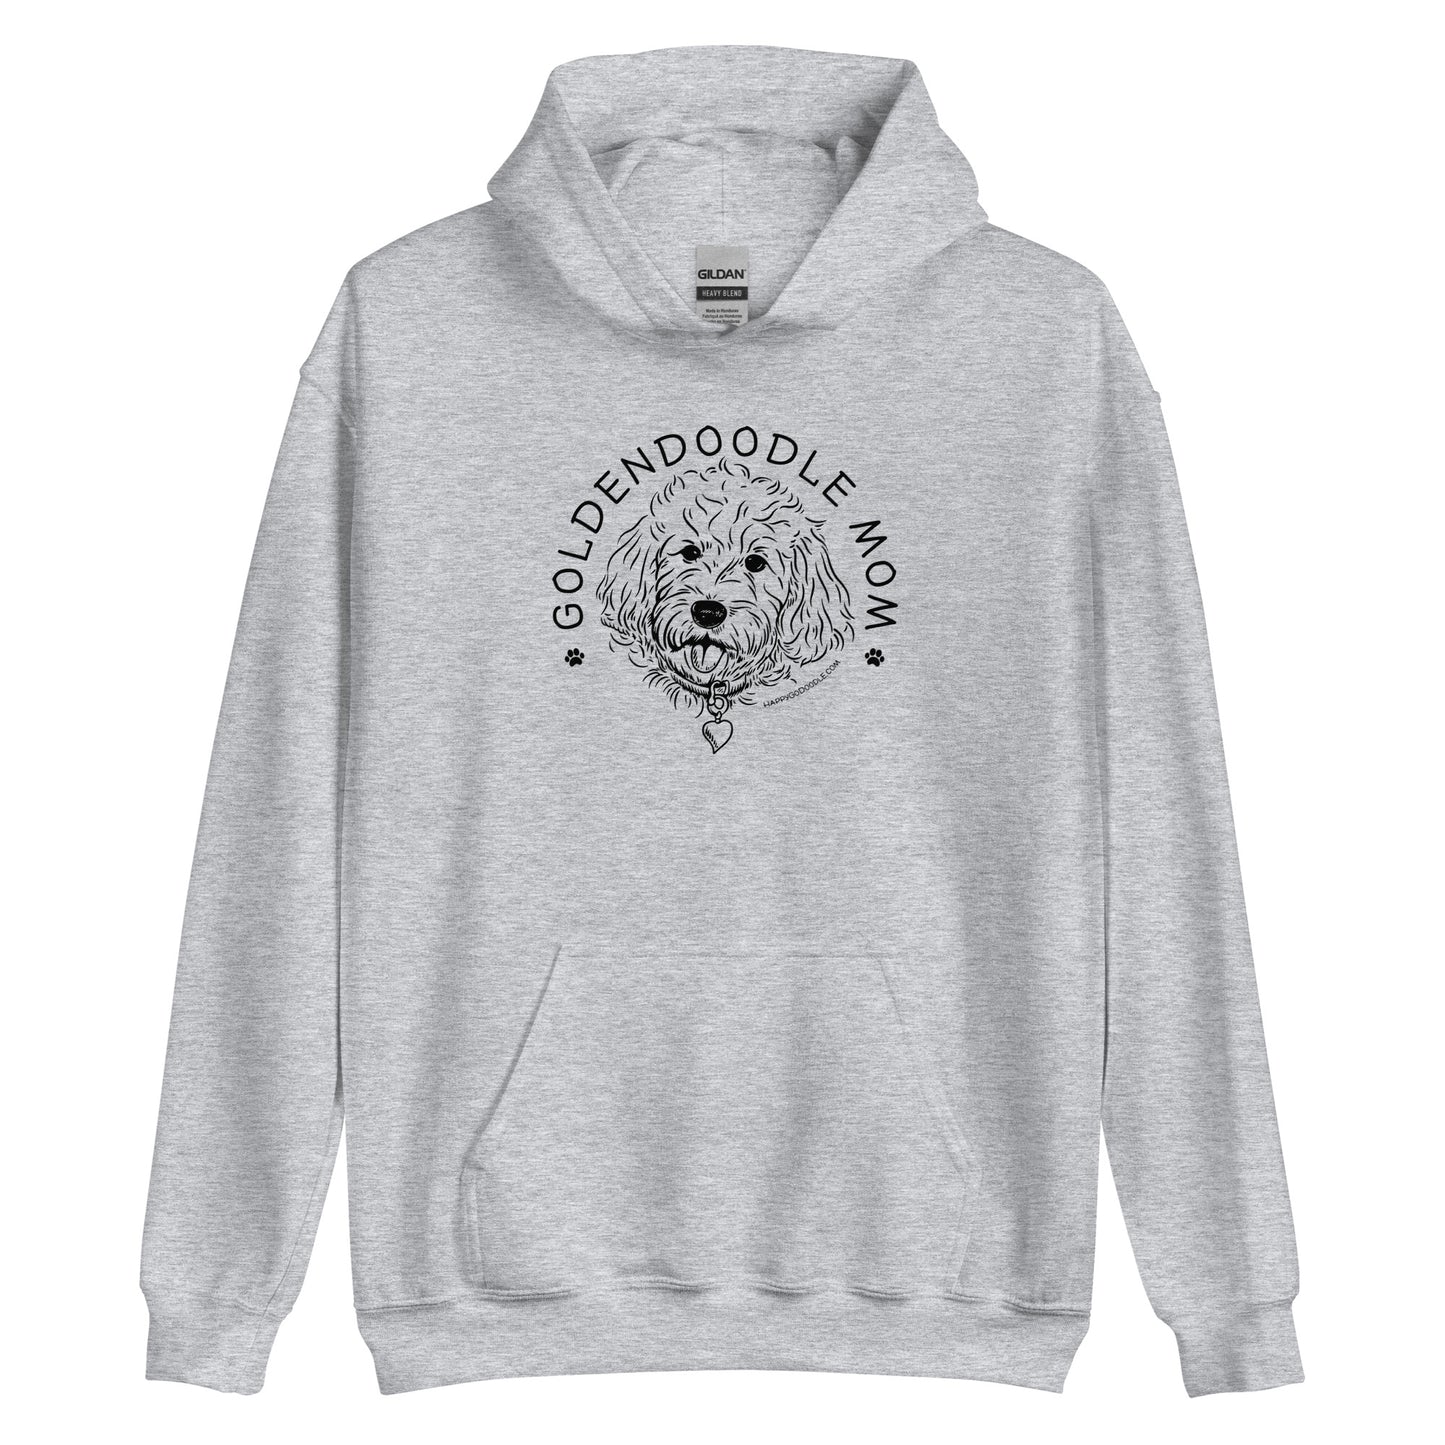 Goldendoodle hoodie with Goldendoodle face and words "Goldendoodle Mom" in sport grey color